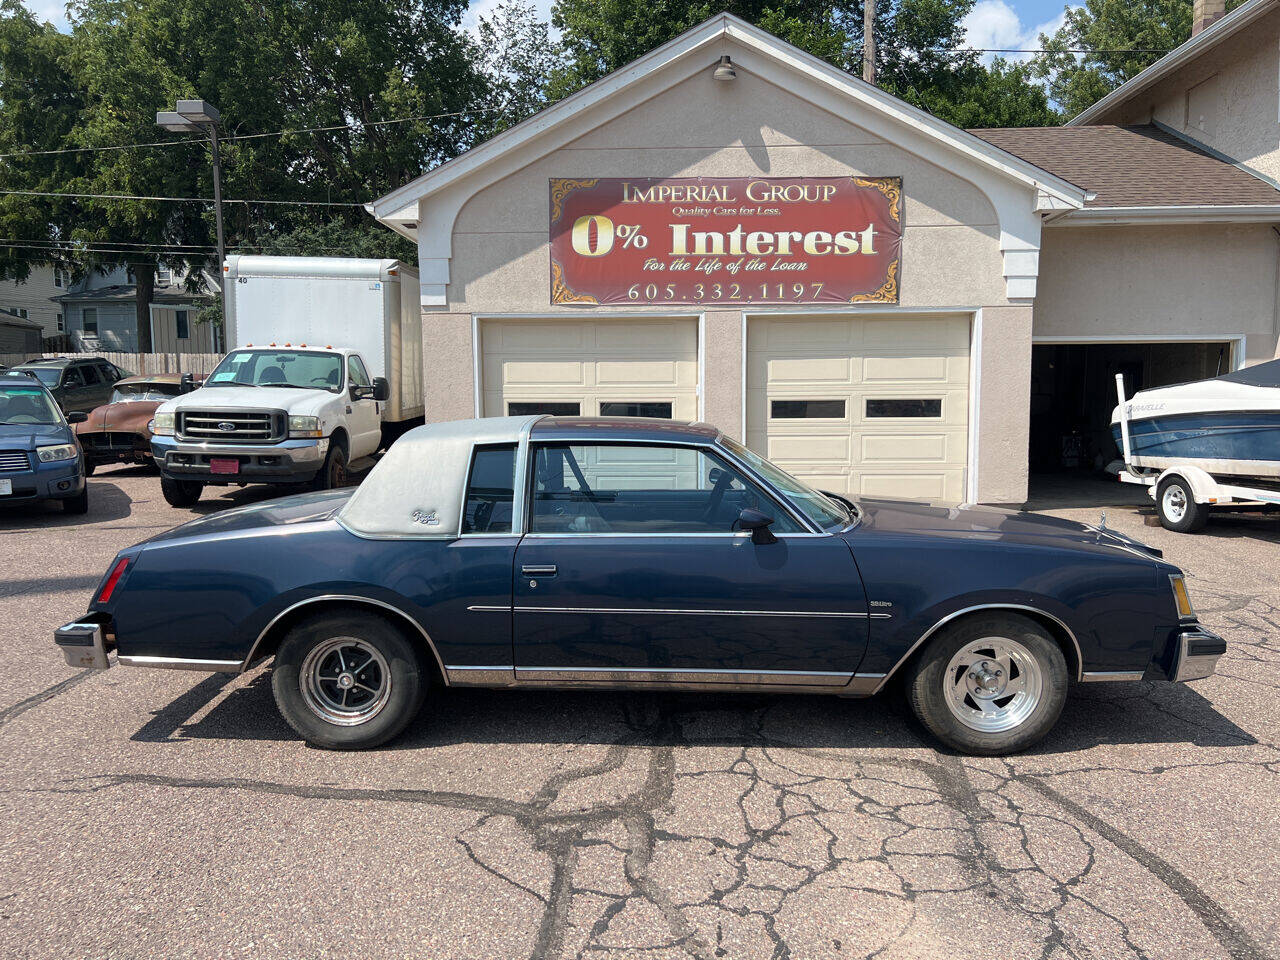 1979 Buick Regal For Sale, 42% OFF